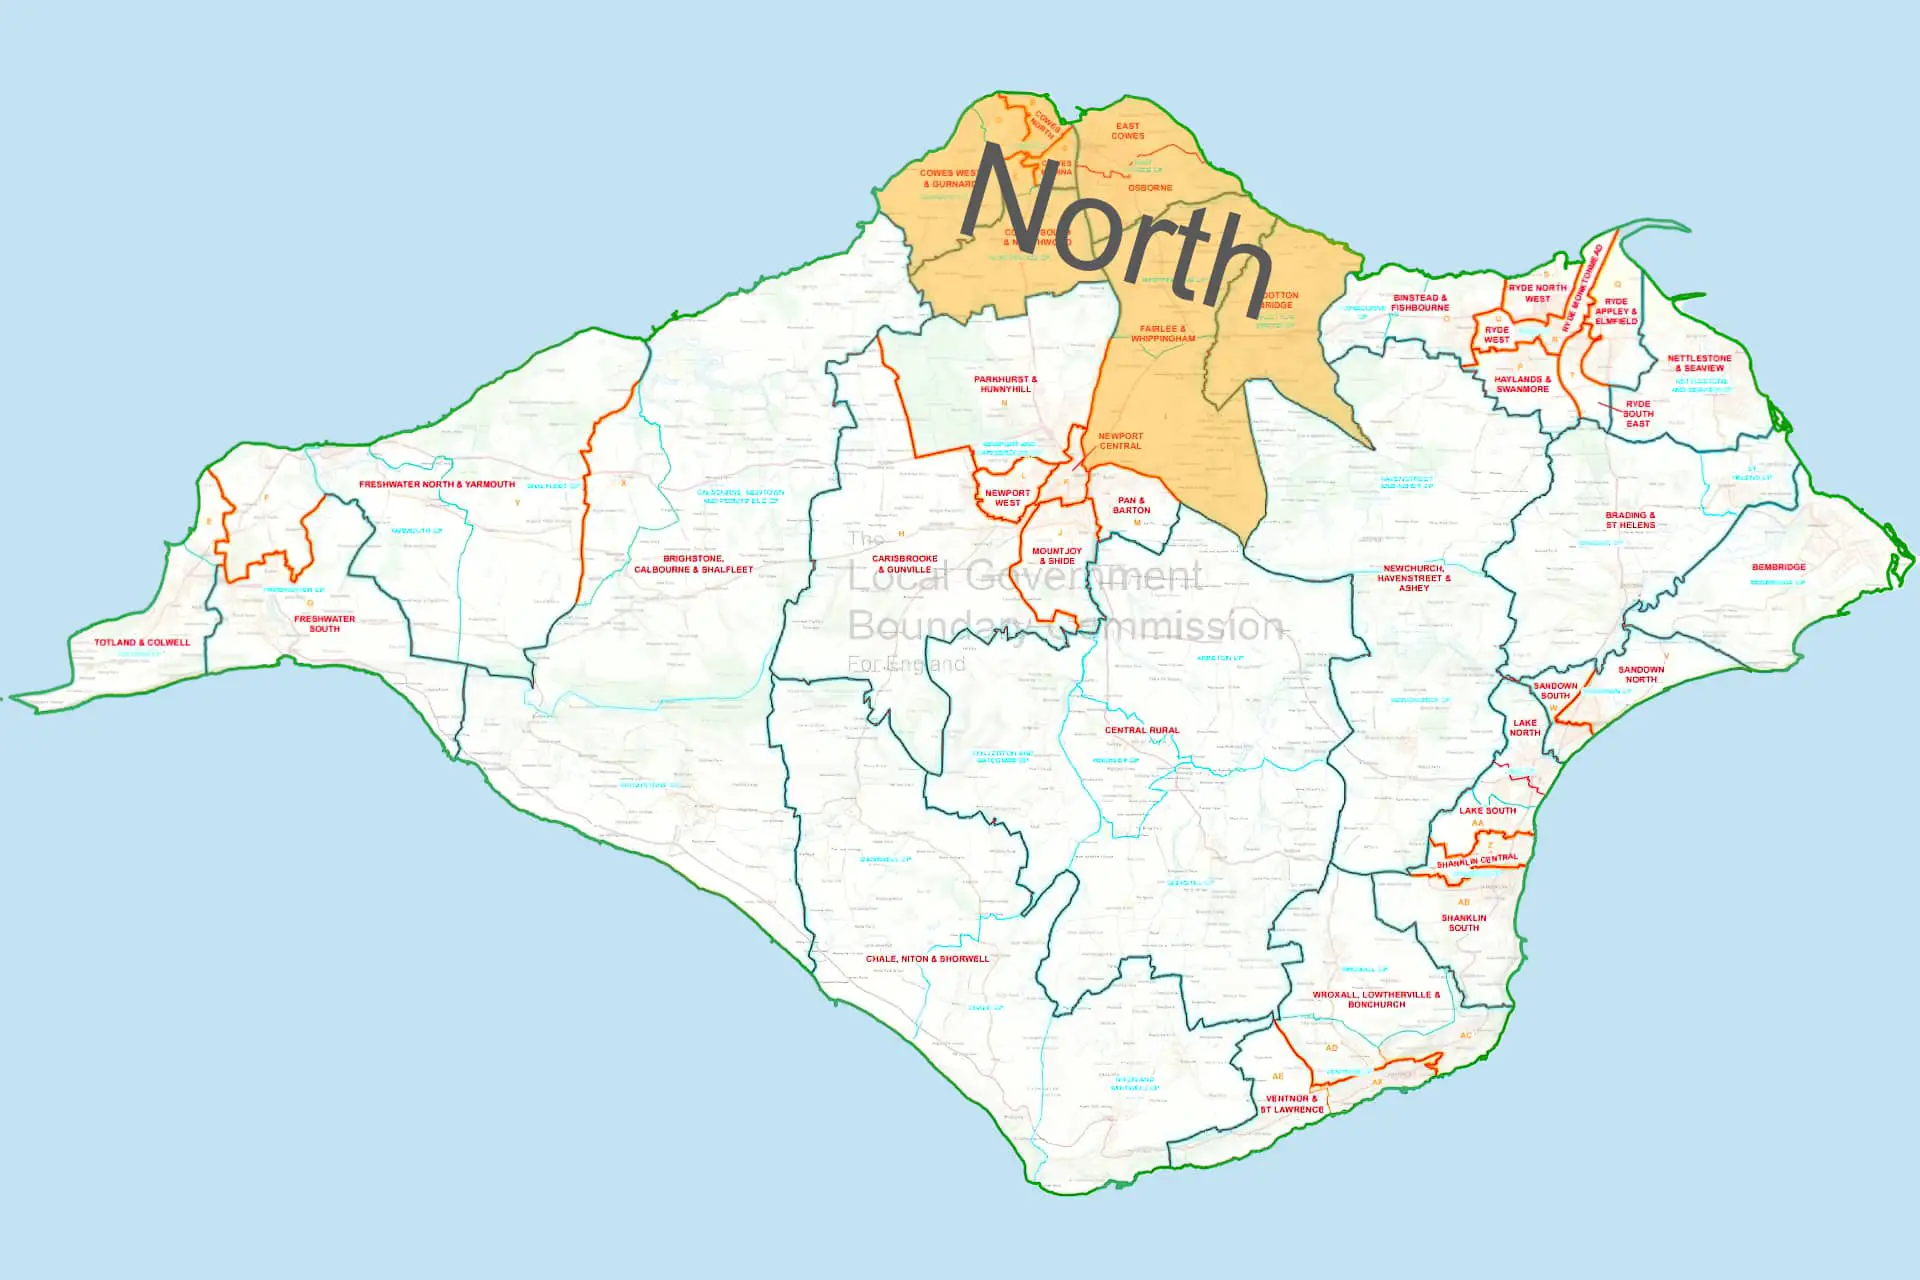 Isle of Wight - Boundary map - North (comp)